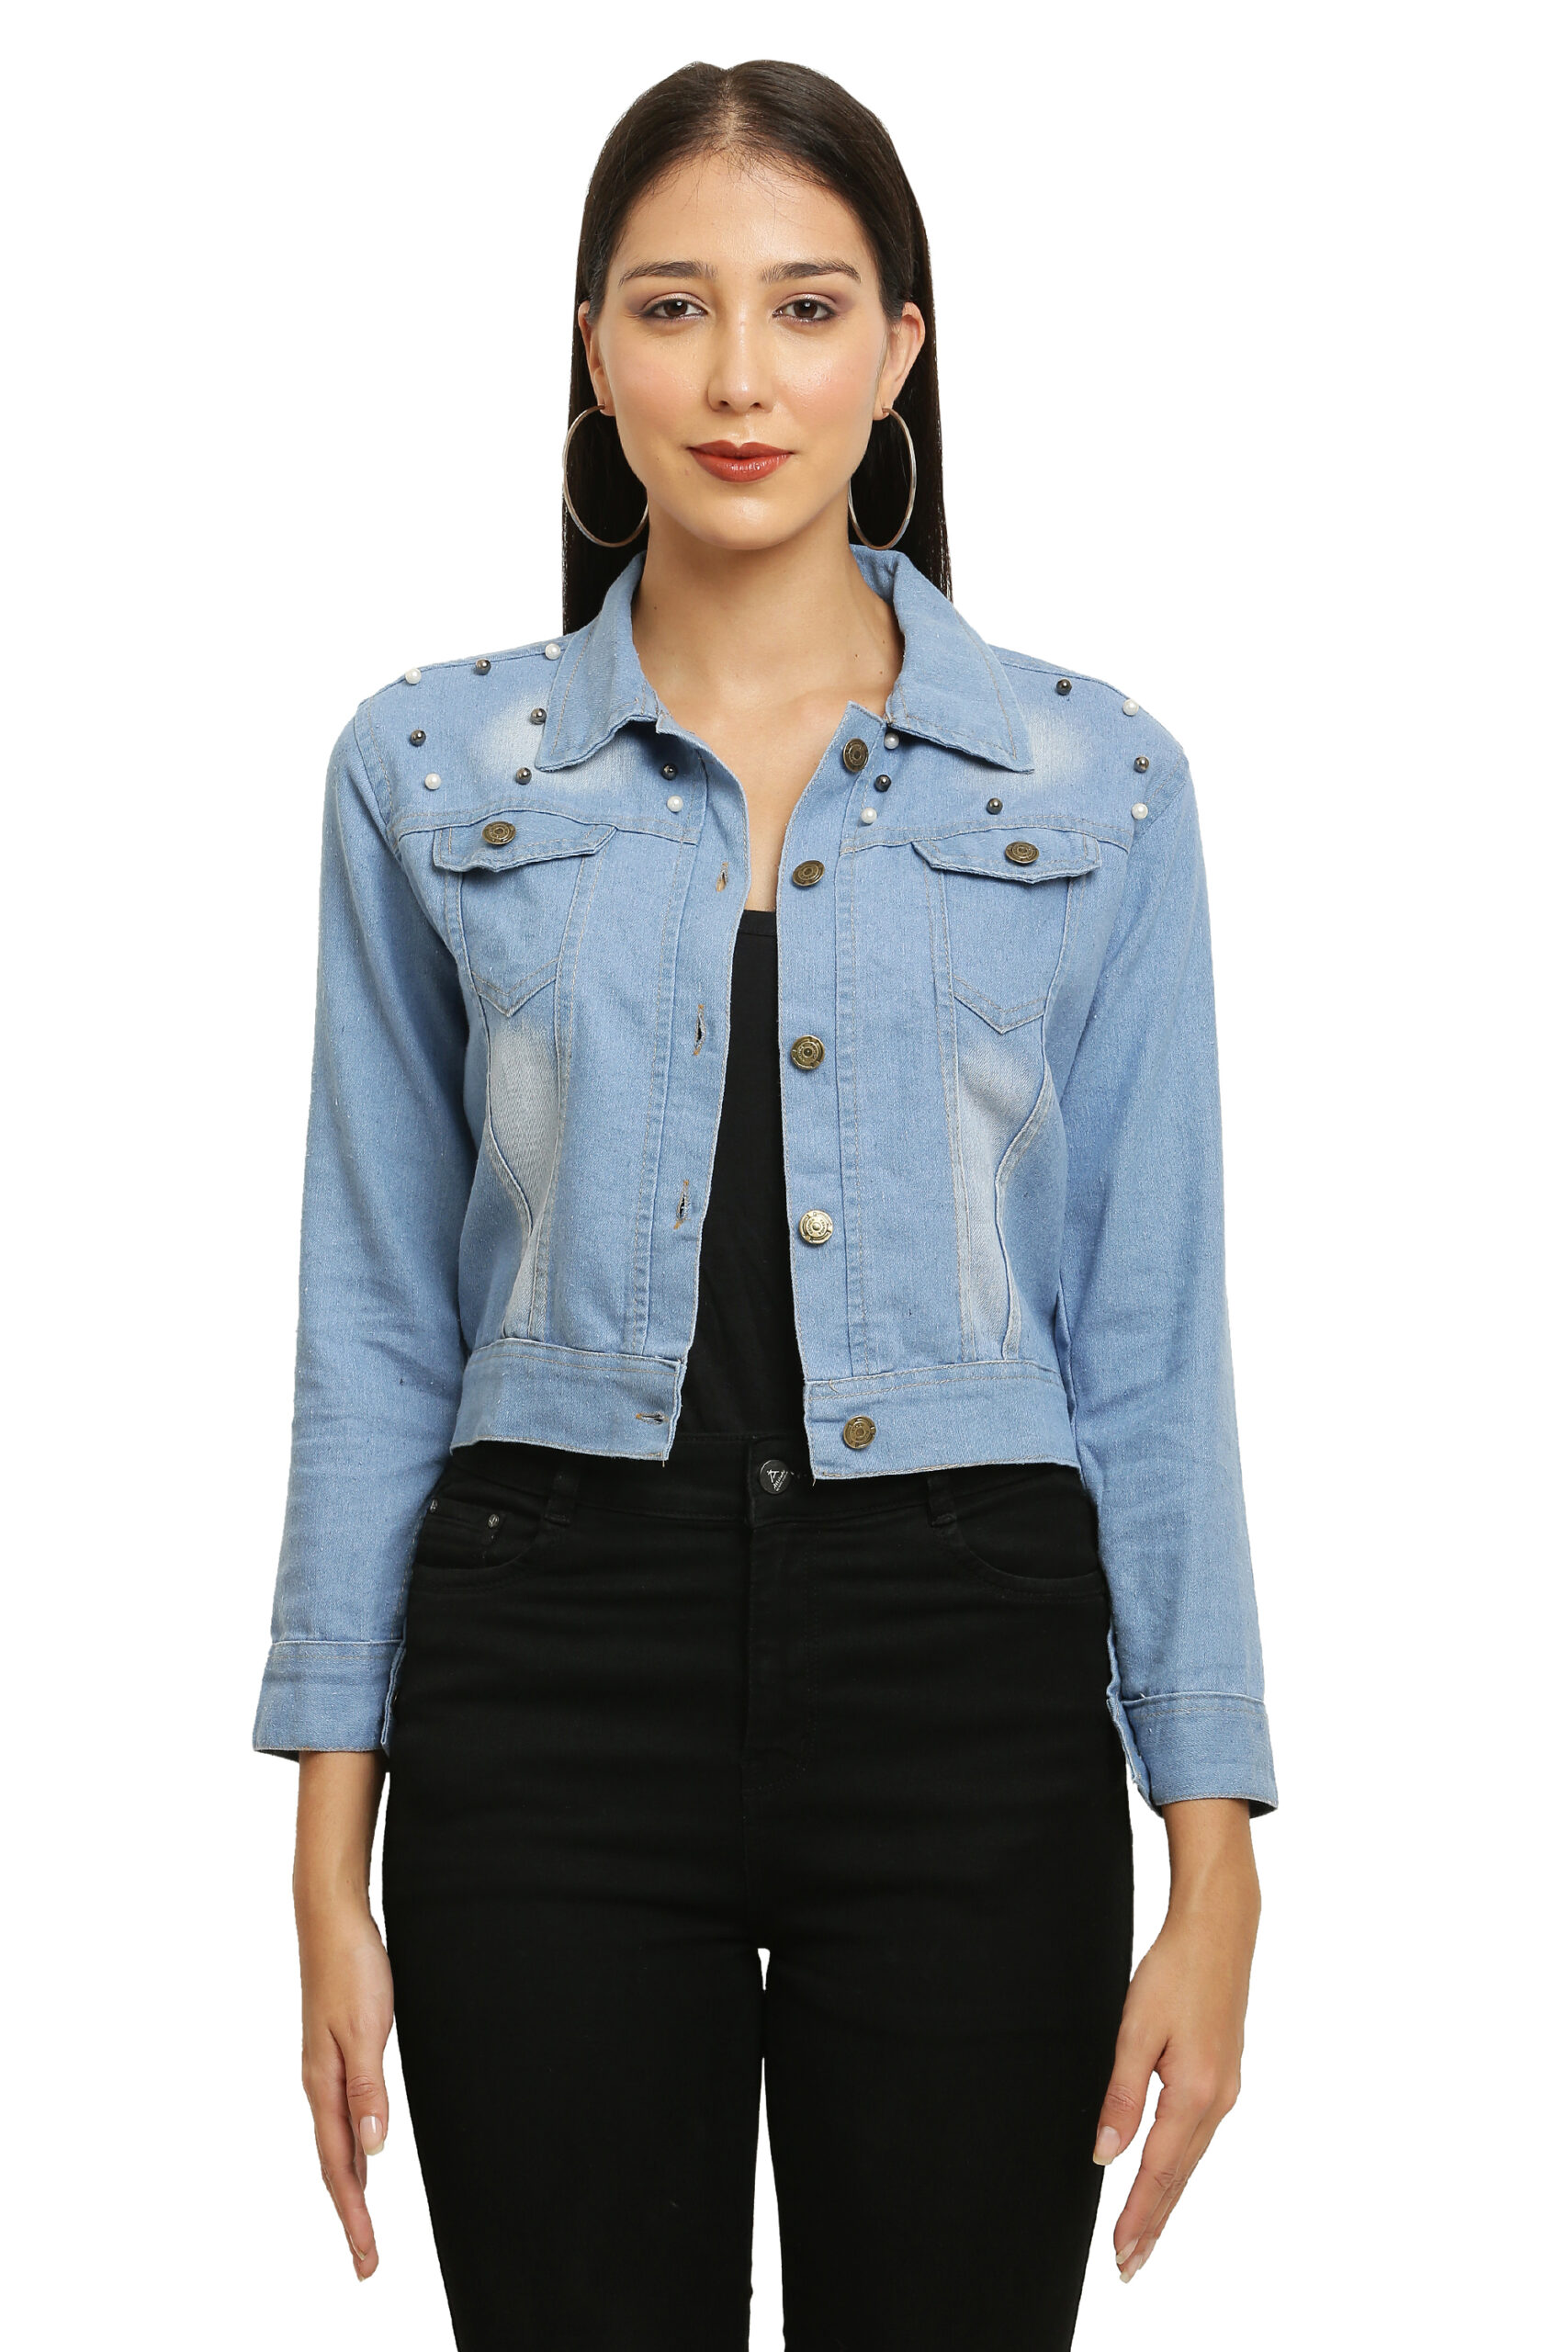 Jackets For Women - Buy Women Fashion Jackets Online at Best Prices In  India | Flipkart.com